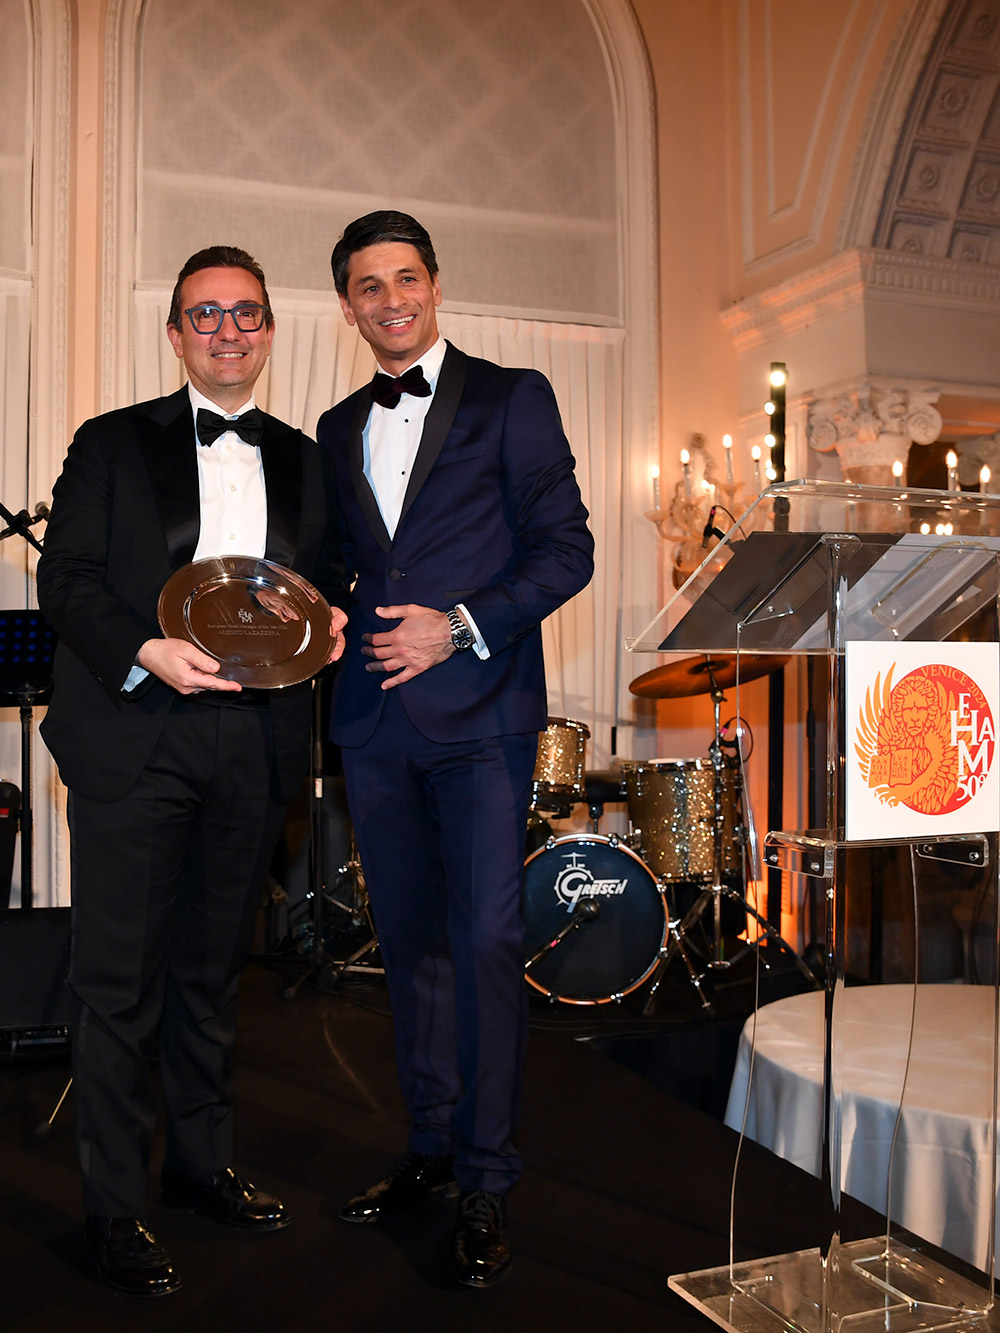 EHMA President Panos Almyantis presents the award to Alessio Lazazzera General Manager of the iconic Hotel Excelsior Venice Lido Resort